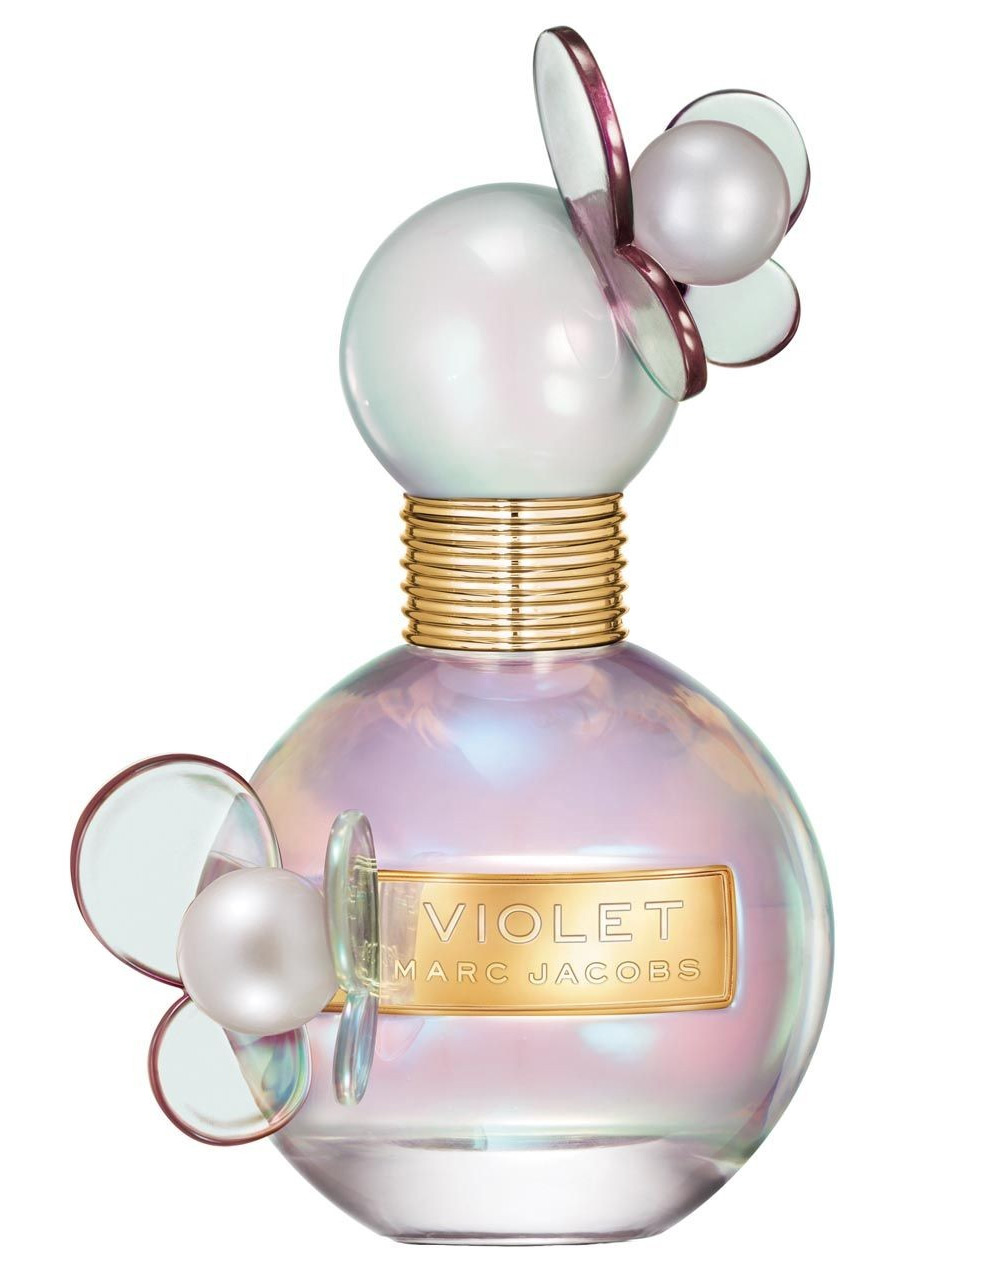 Violet Marc Jacobs perfume - a new fragrance for women 2015